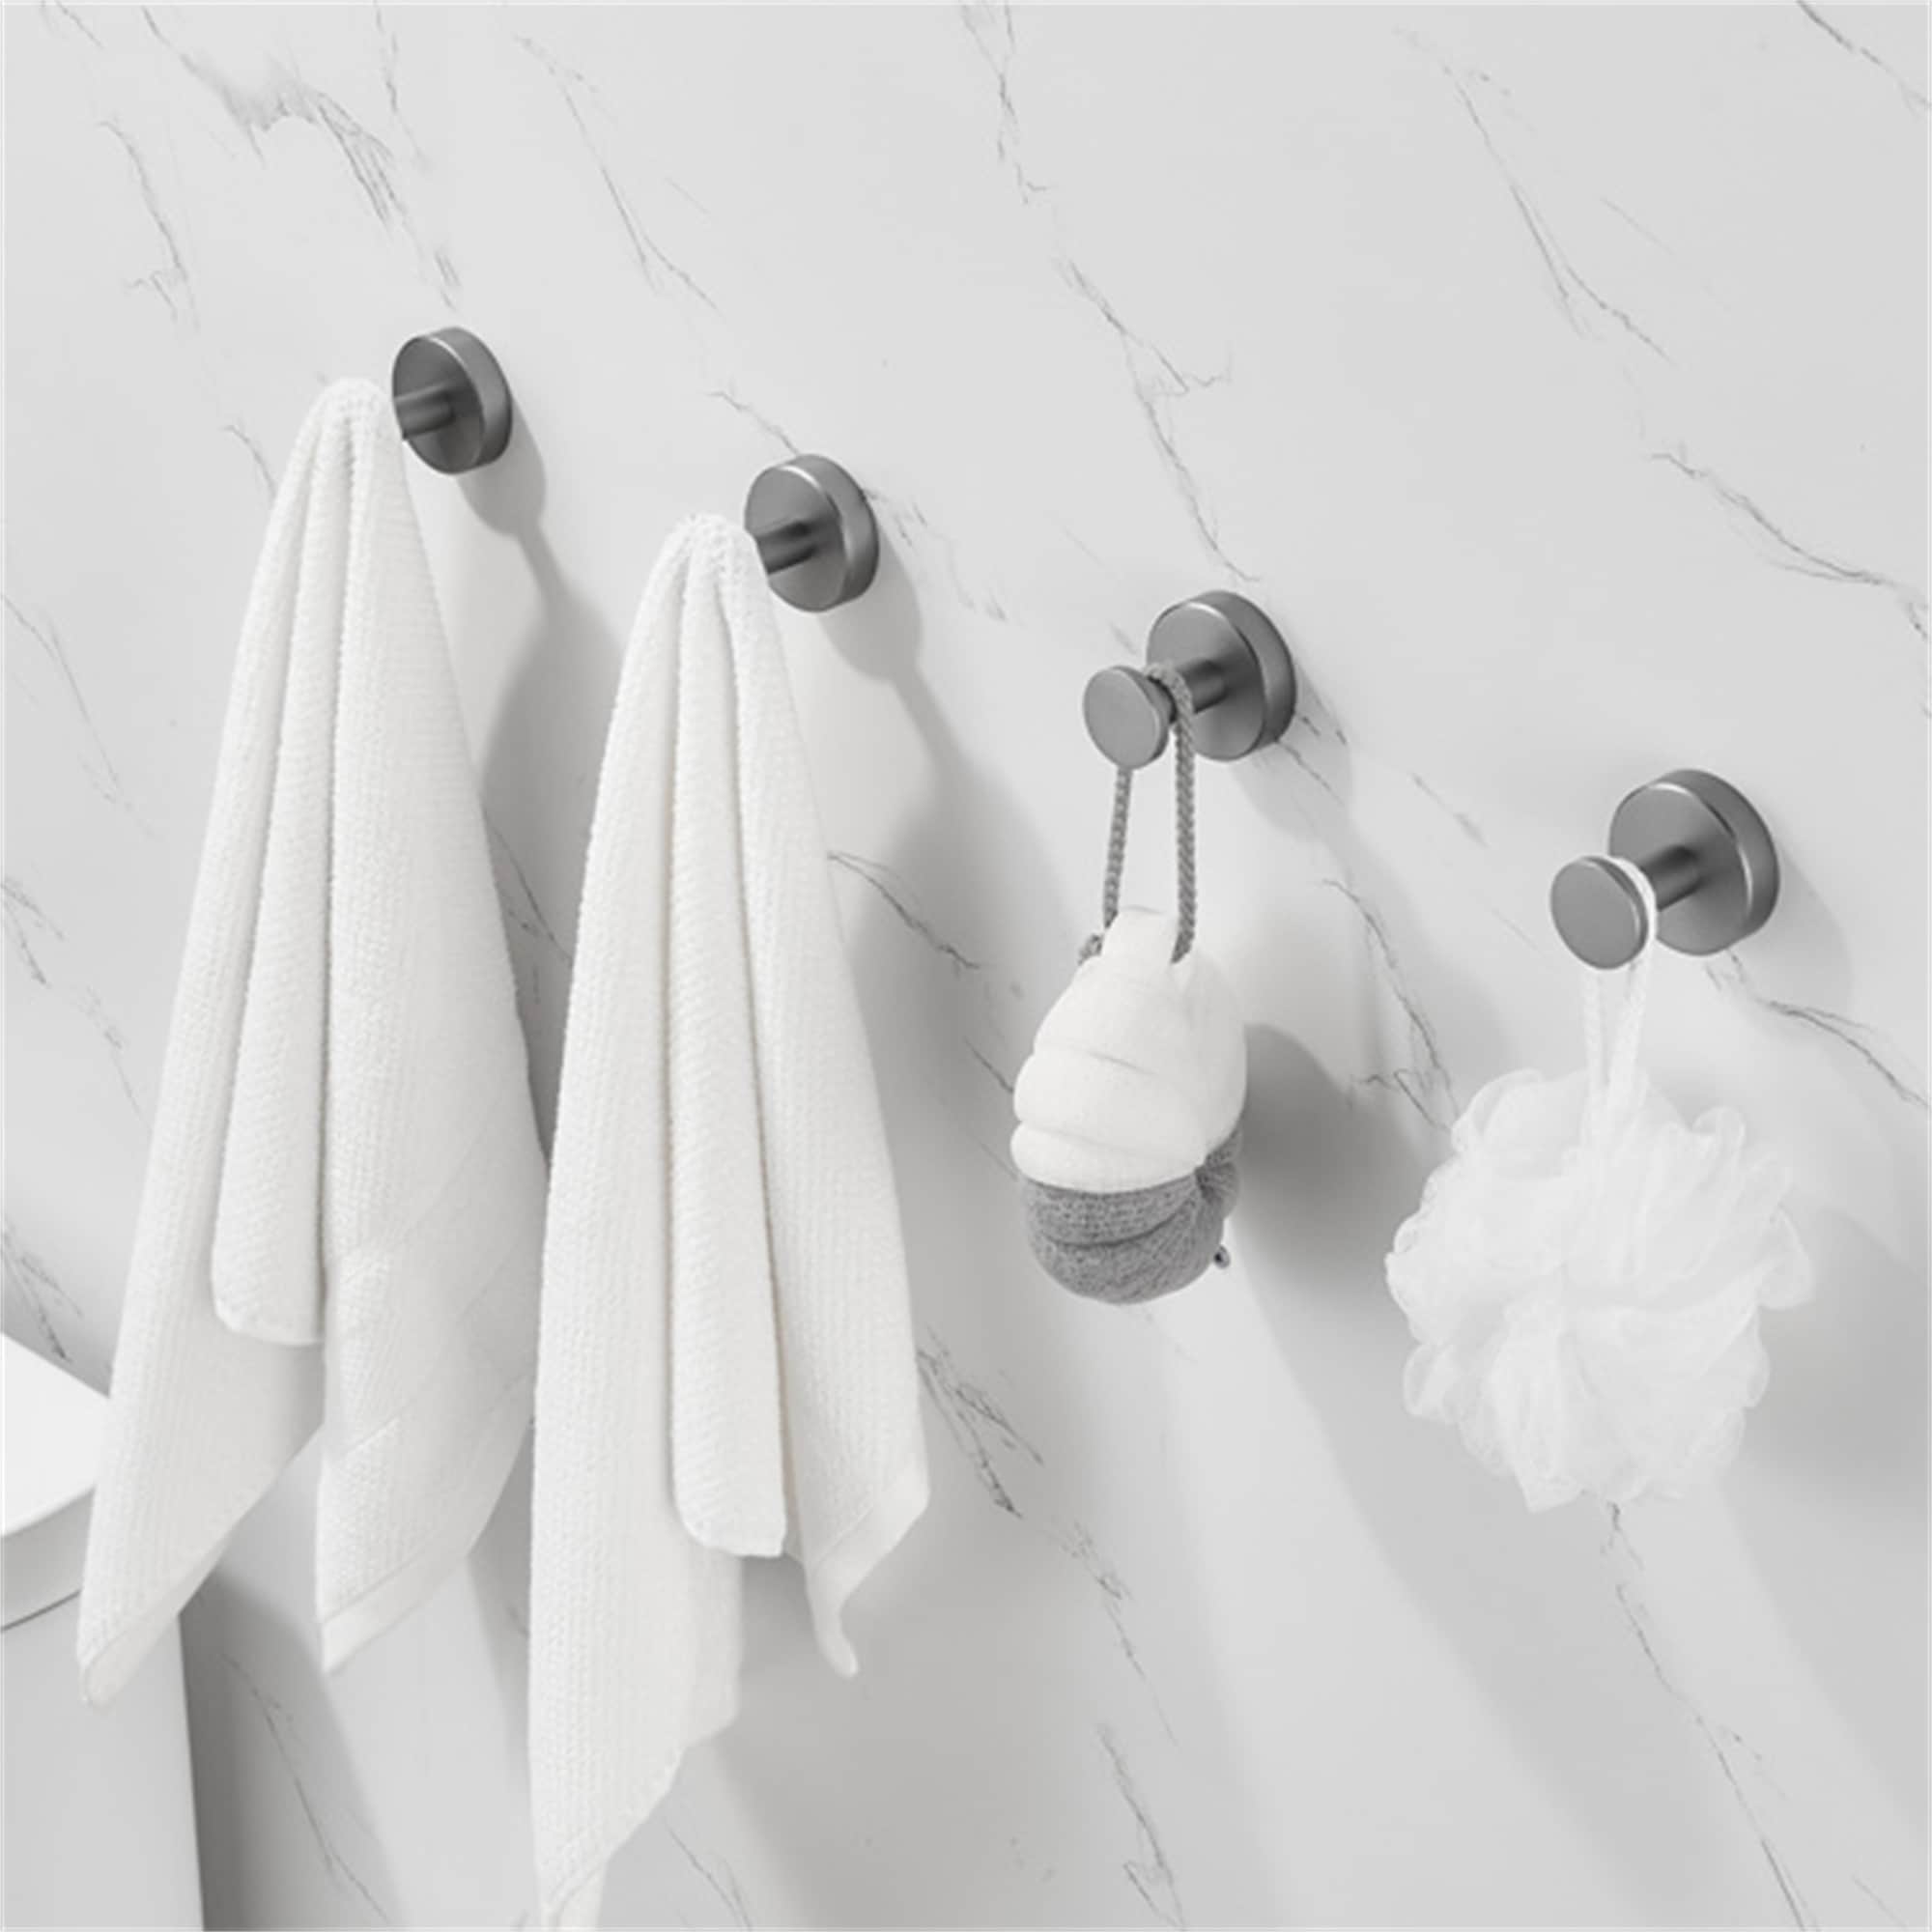 https://ak1.ostkcdn.com/images/products/is/images/direct/ff9b1a559d1bc20c156b2ff5a5280d002aa14247/Bathroom-Towel-and-Robe-Hook-W--Screws-Wall-Mounted-%28Set-of-4%29.jpg